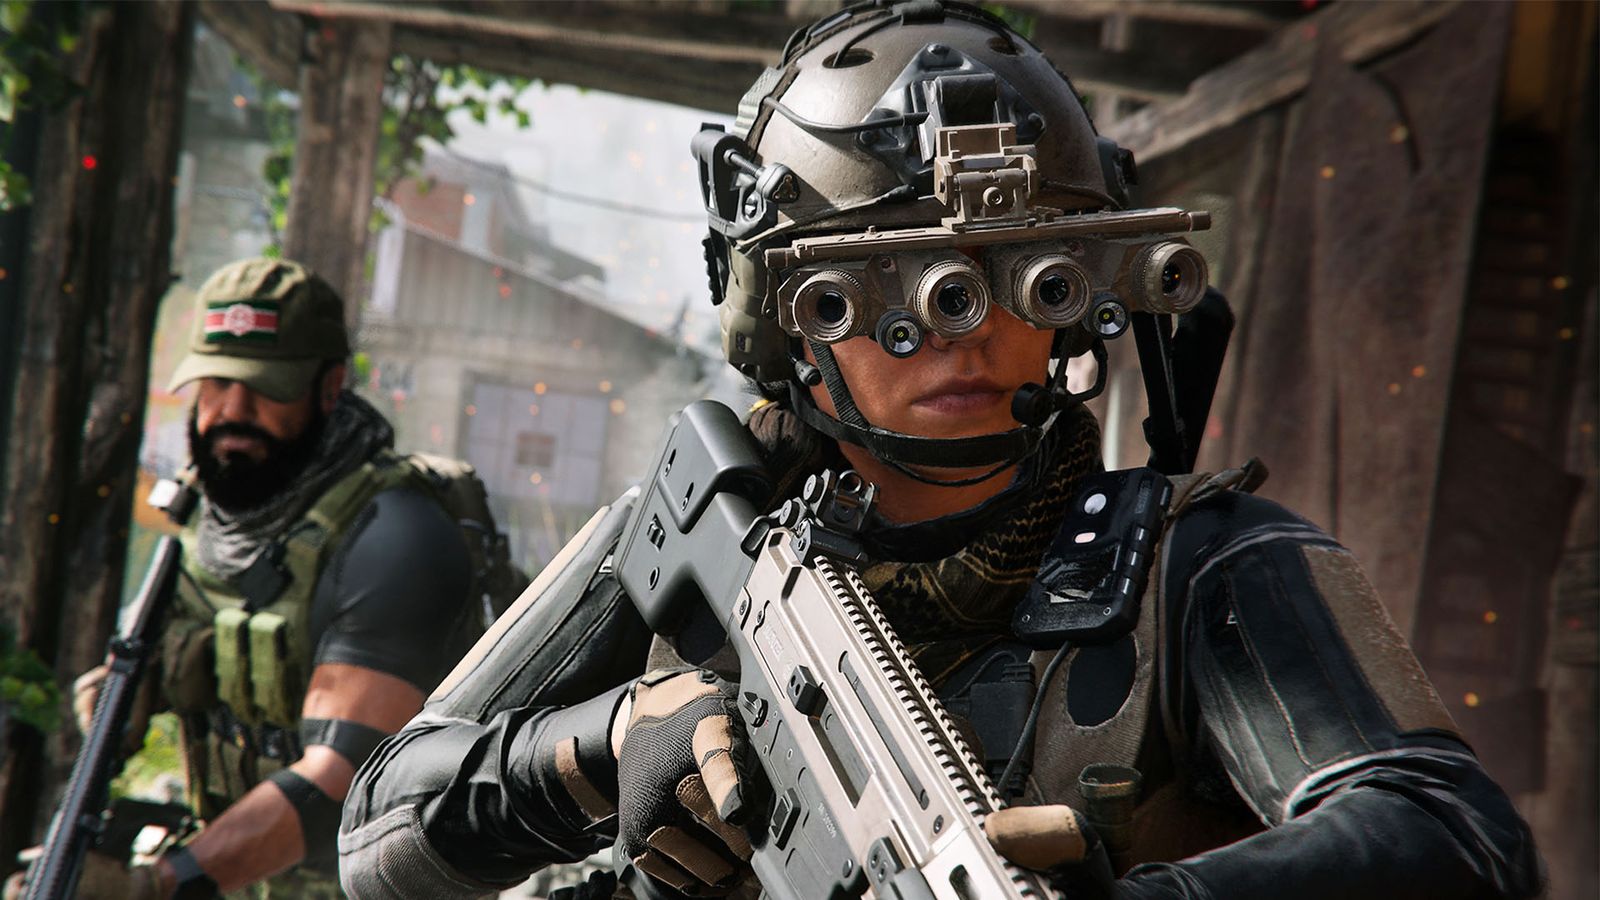 Modern Warfare 3 player wearing night-vision goggles with player in background